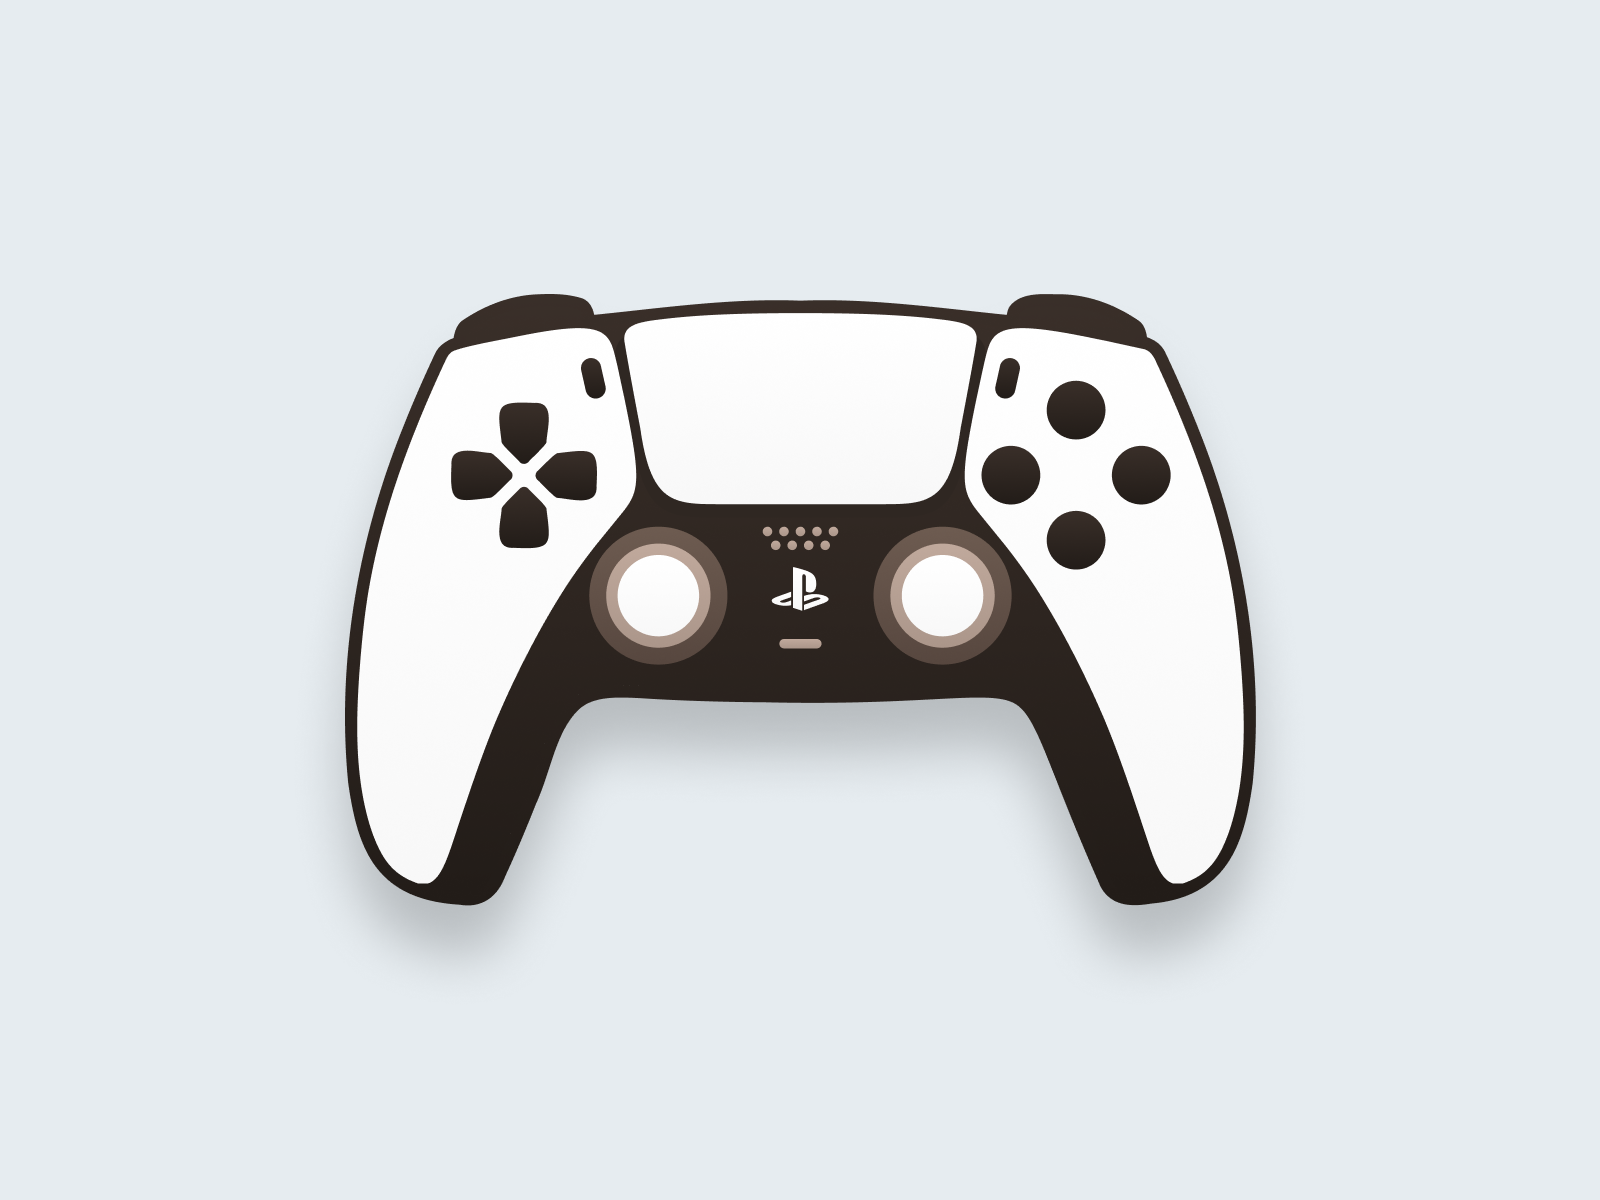 Game Controller Playstation Icon Editable Vector Logo Stock Illustration -  Download Image Now - iStock